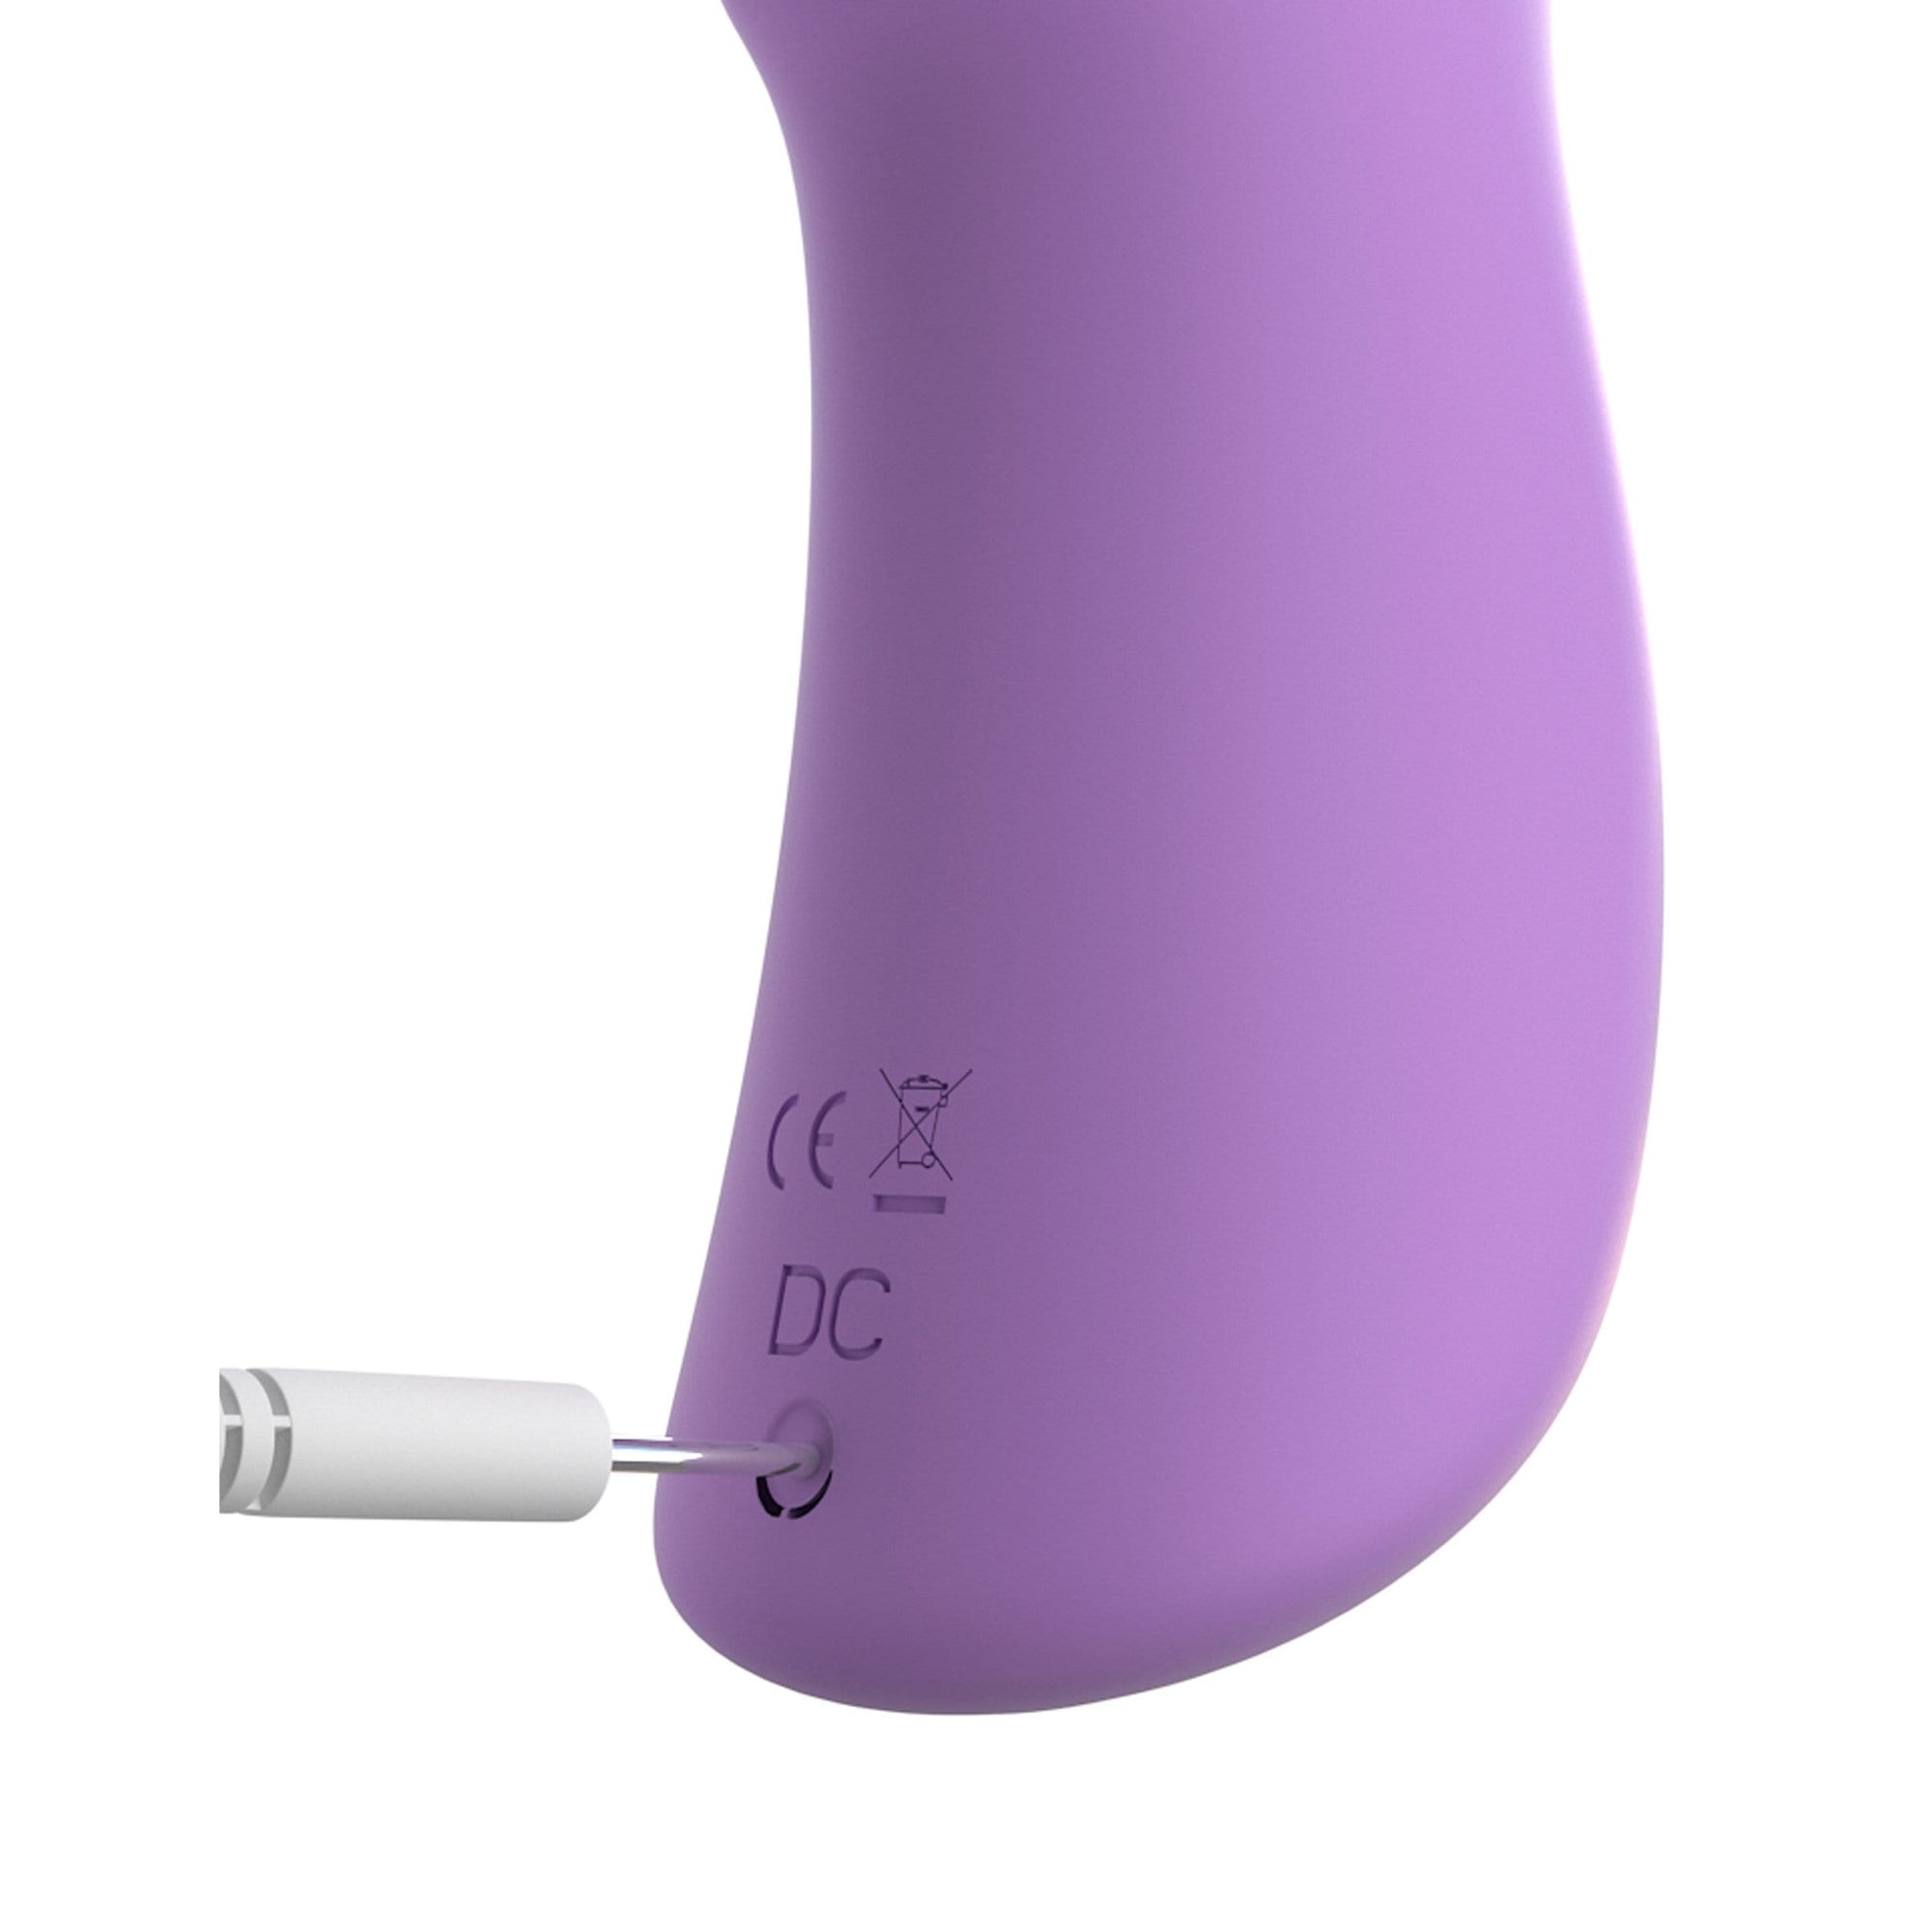 Pipedream - Fantasy For Her Flexible Please Her Massager (Purple) -  G Spot Dildo (Vibration) Rechargeable  Durio.sg